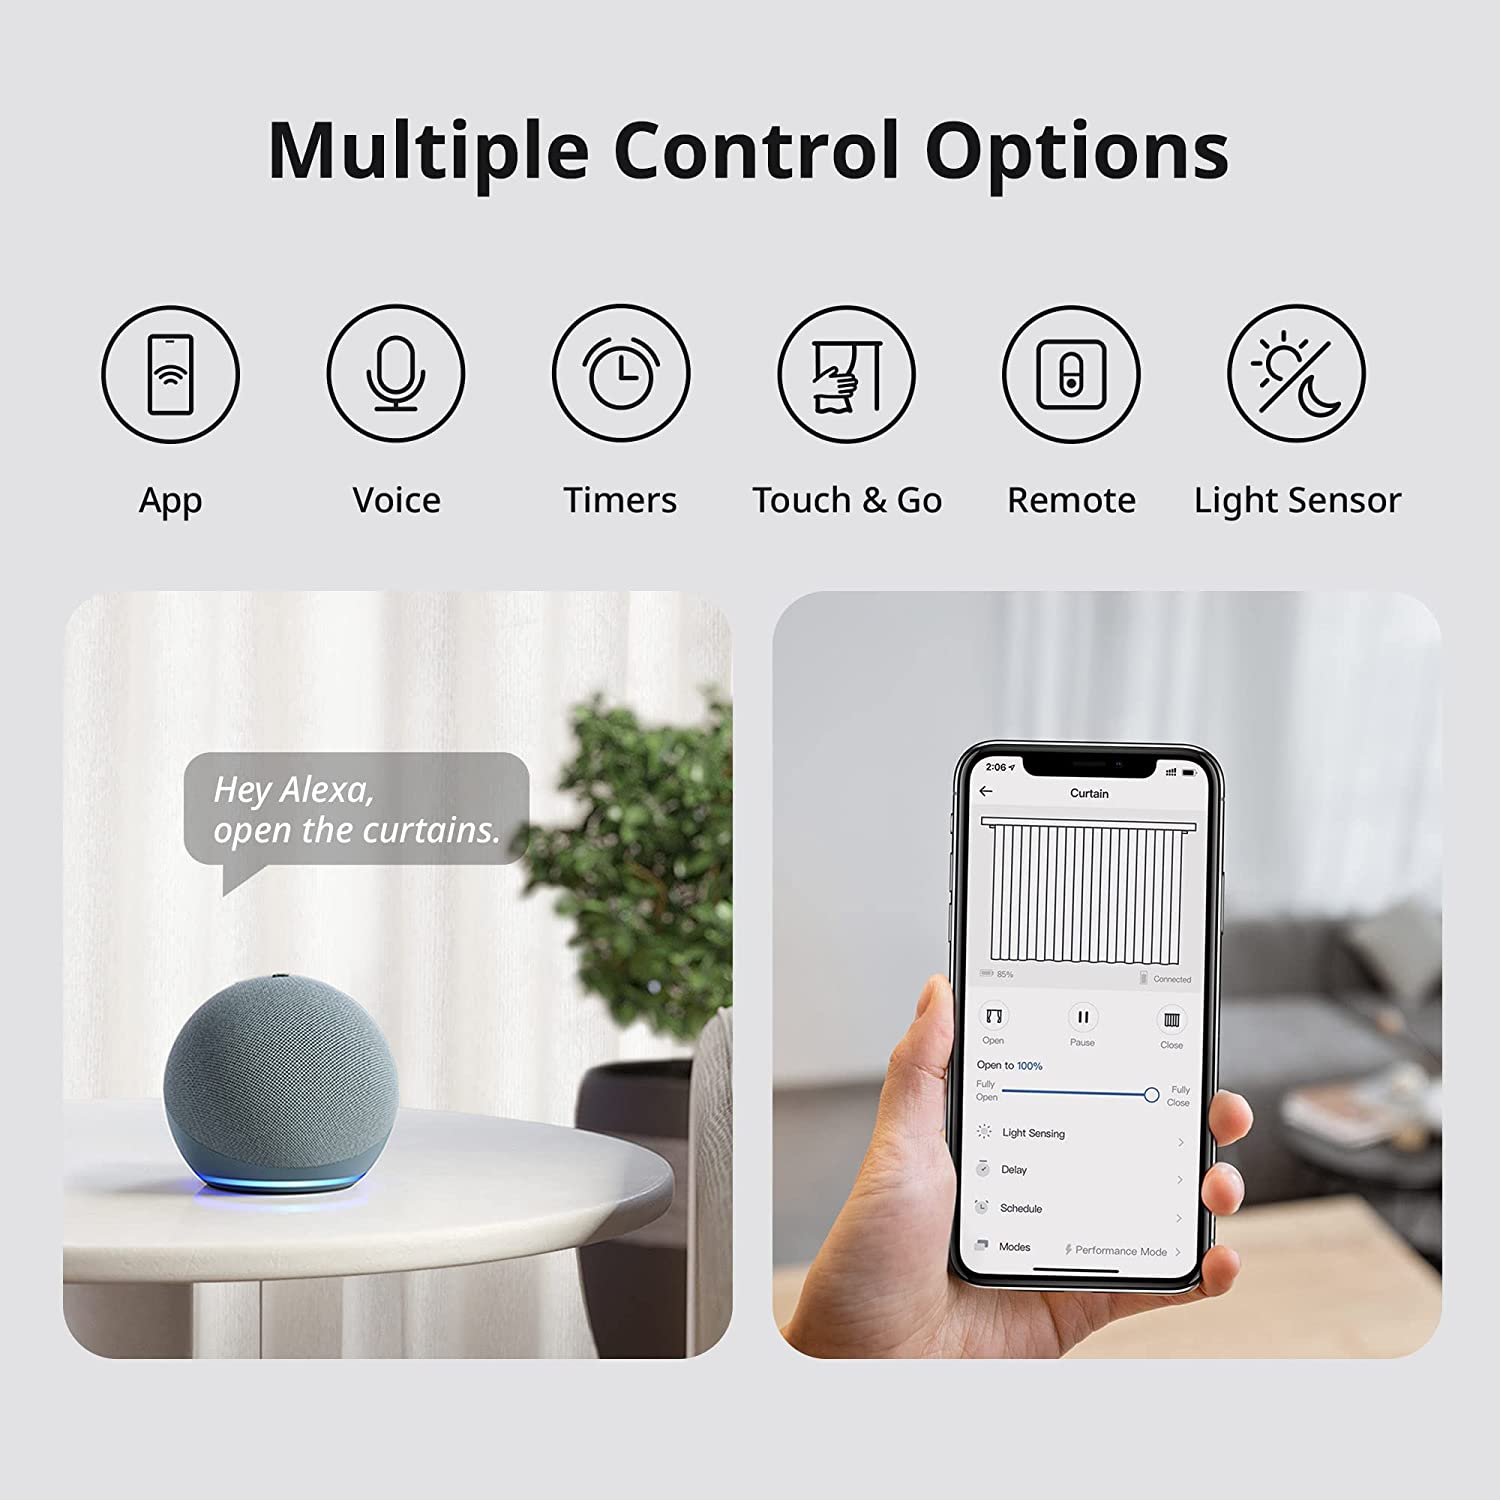 SwitchBot Curtain (Rod 2) with Hub Mini Bundle | Smart Electric Motor - Wireless App Automate Timer Control with SwitchBot Hub Mini to Make it Compatible with Alexa, Google Home, IFTTT